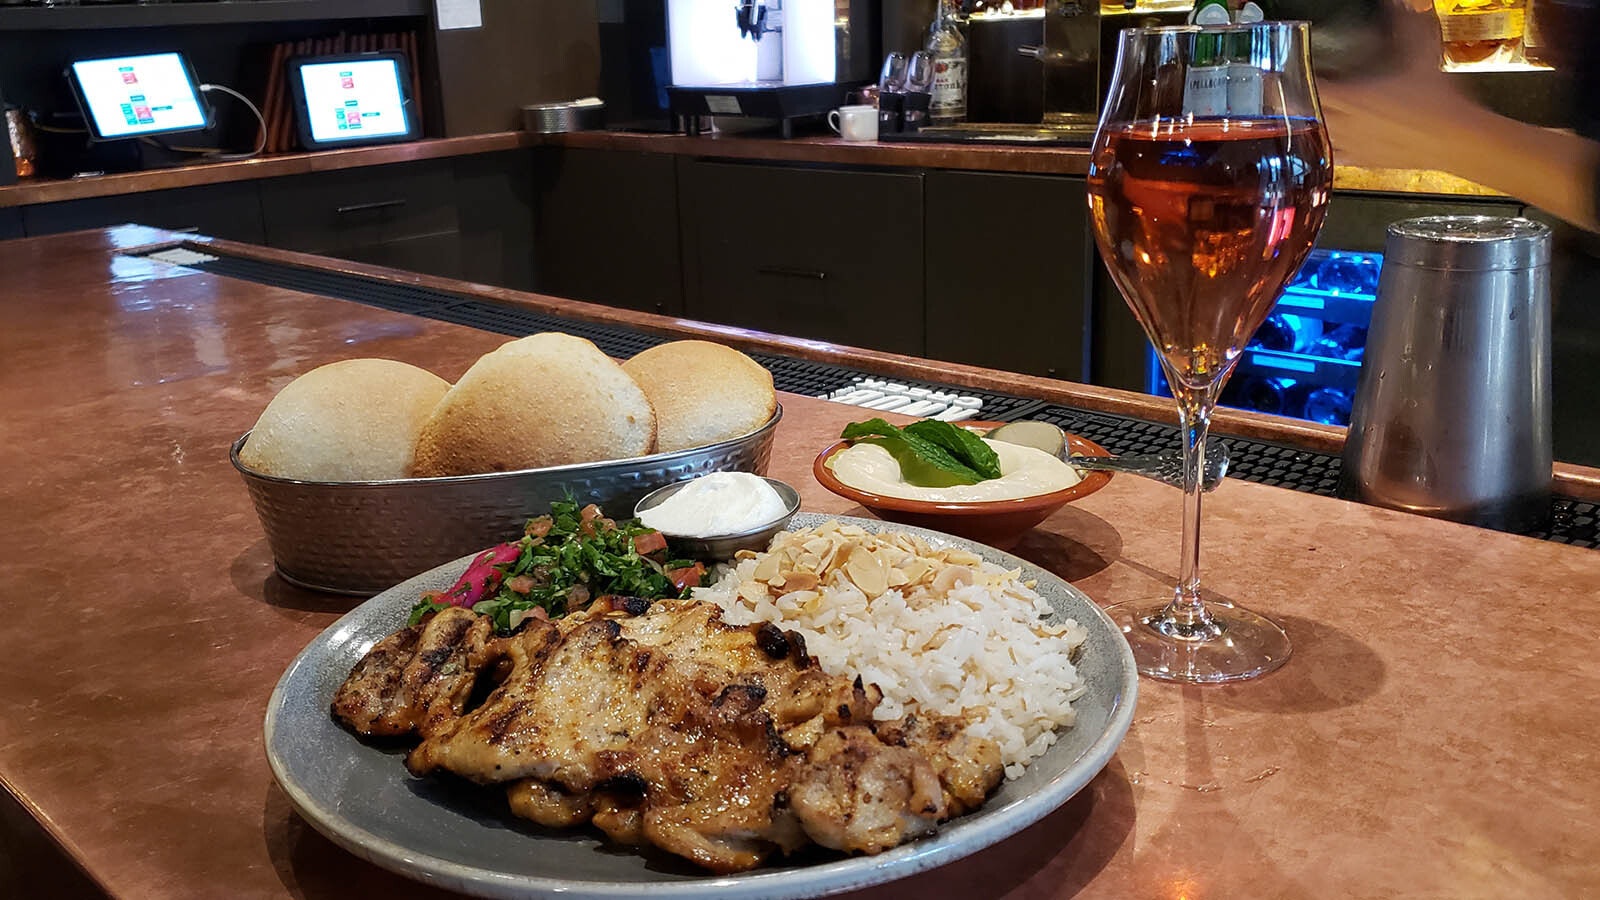 The chicken is delectable cooked just long enough, but not so long it's not tender any more. Served with rice pilaf and the requisite dish of hummus and balloon bread, without which no Figs trip is complete.